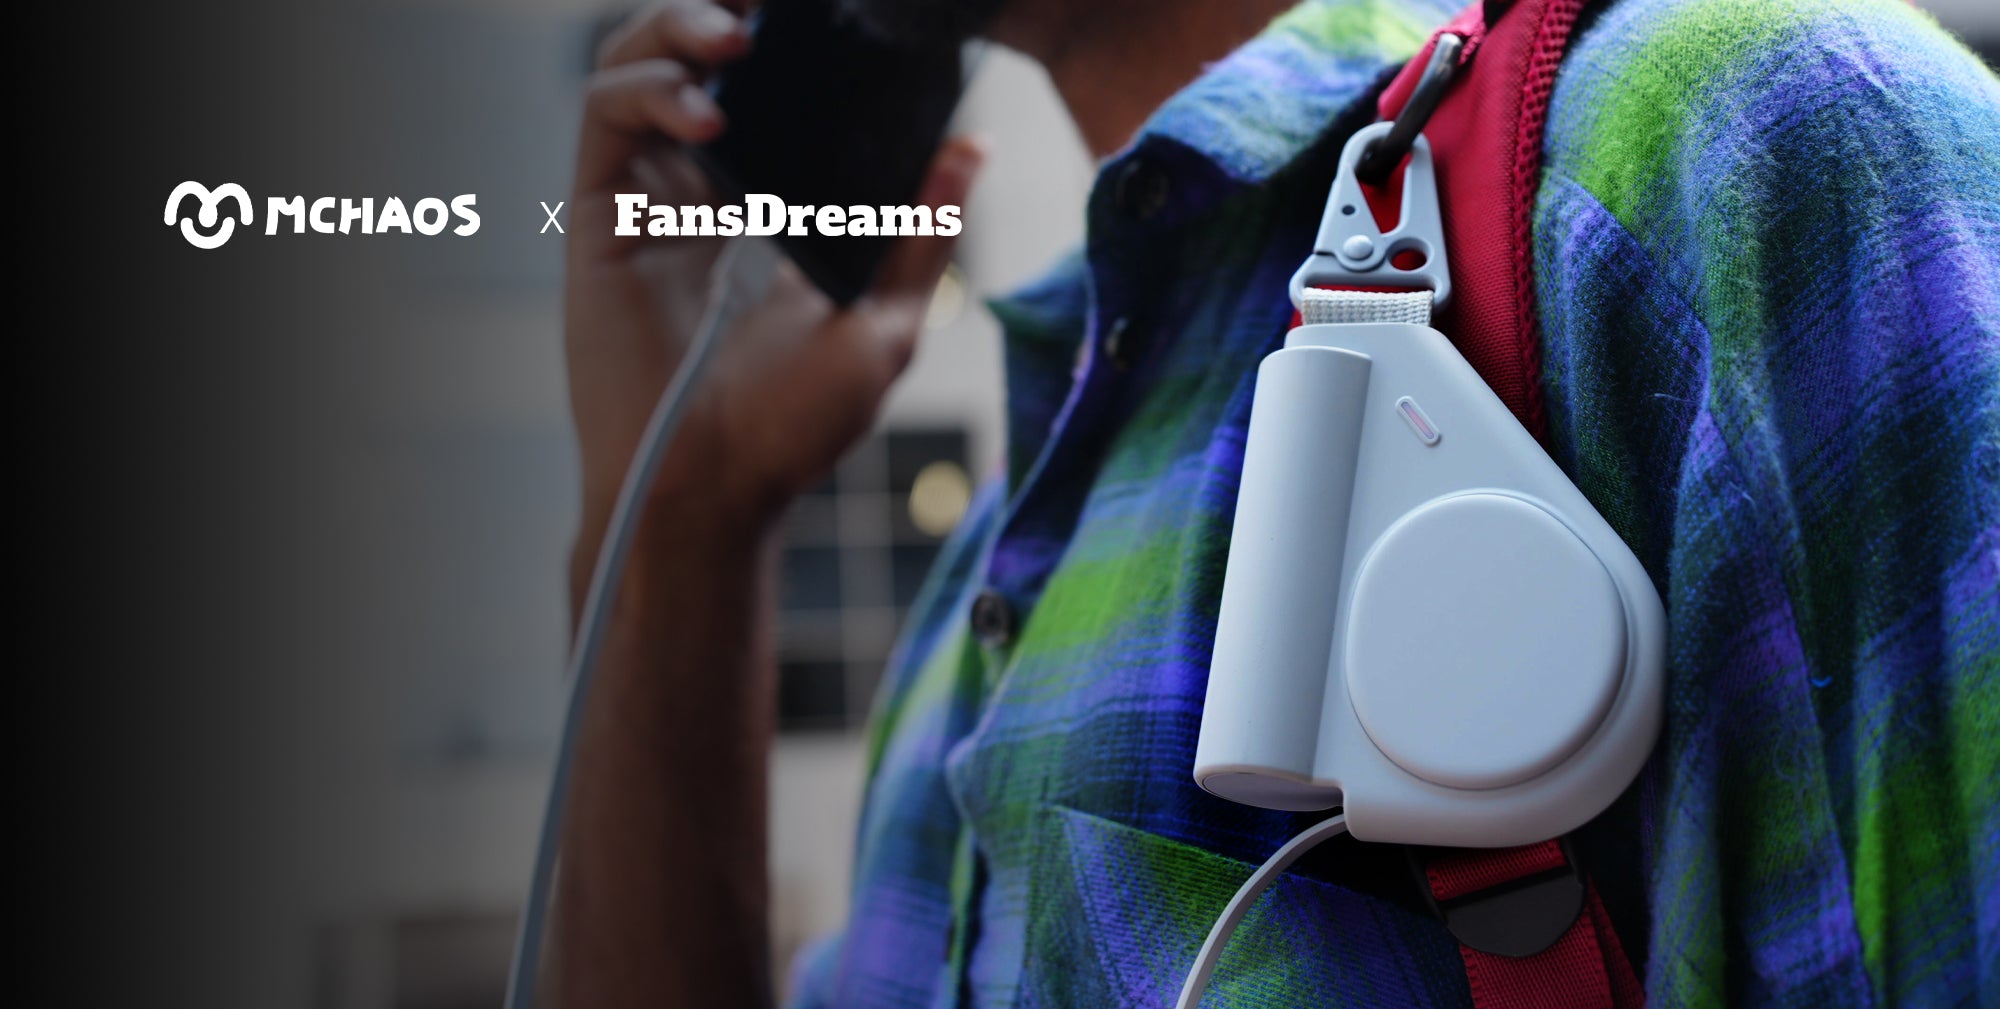 FansDreams×MChaos wearable power bank with a retractable cable